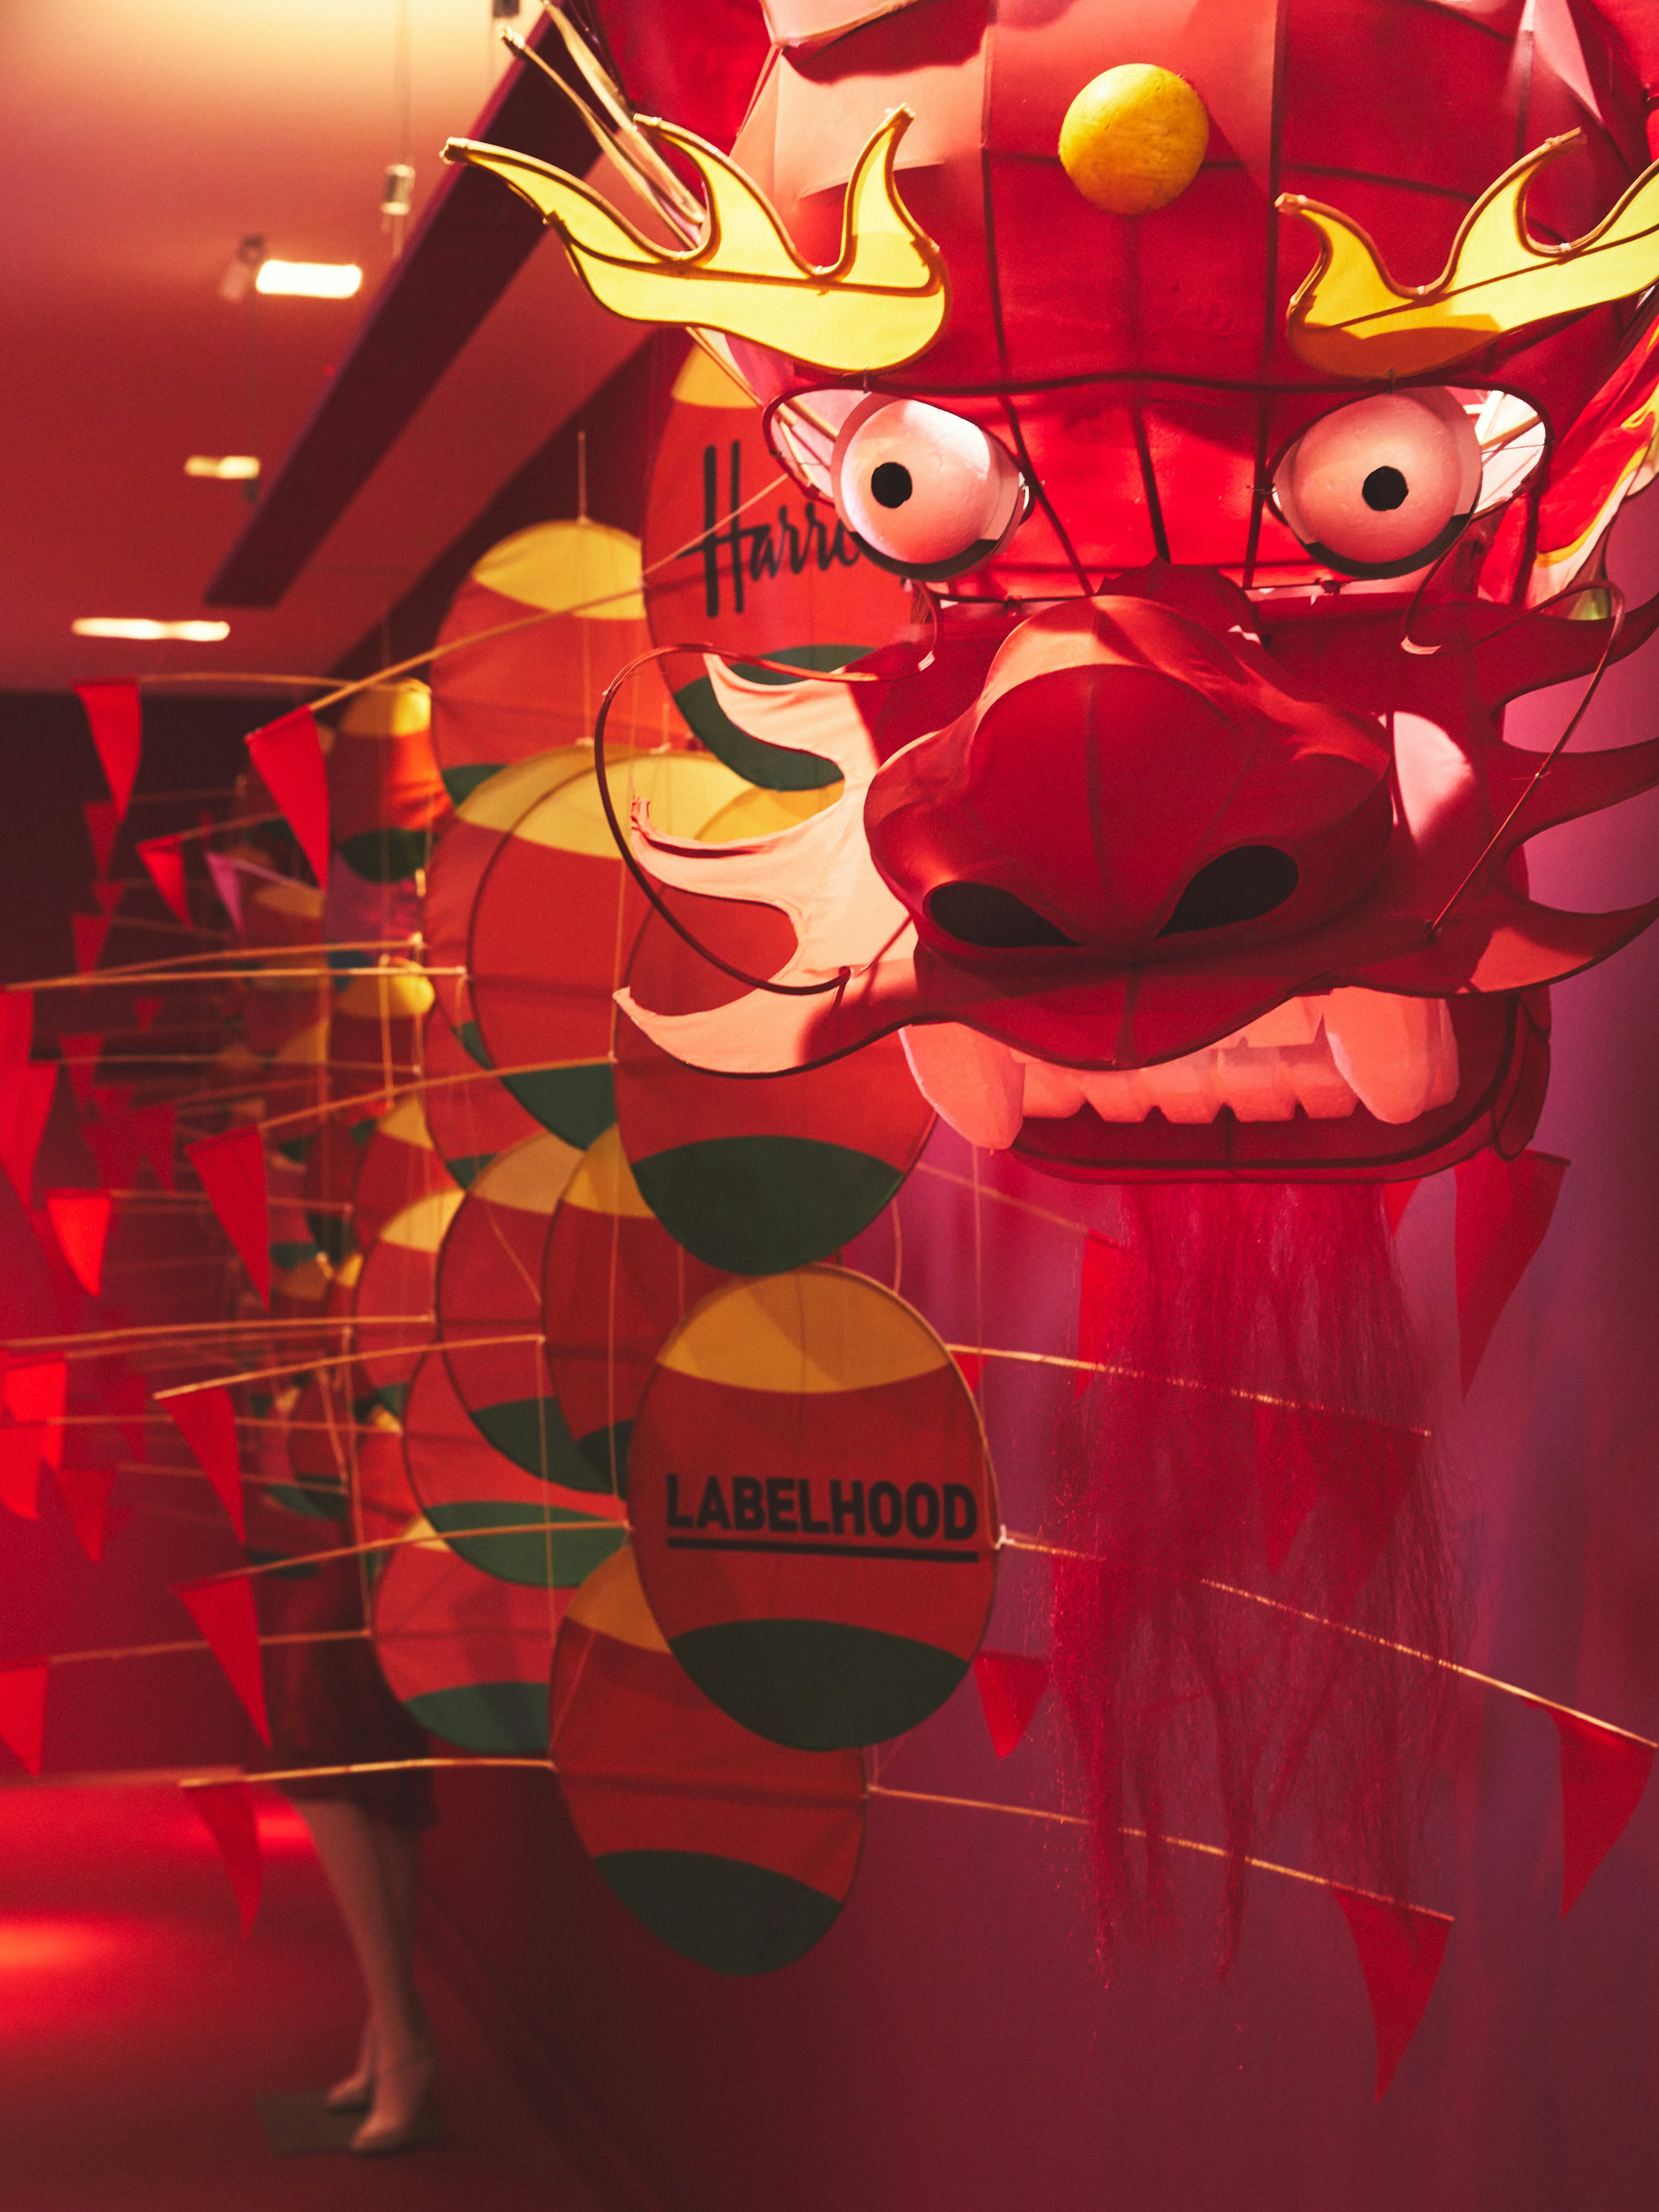 Harrods and Labelhood have reunited for a second year for the Year of the Dragon. Photo: Harrods